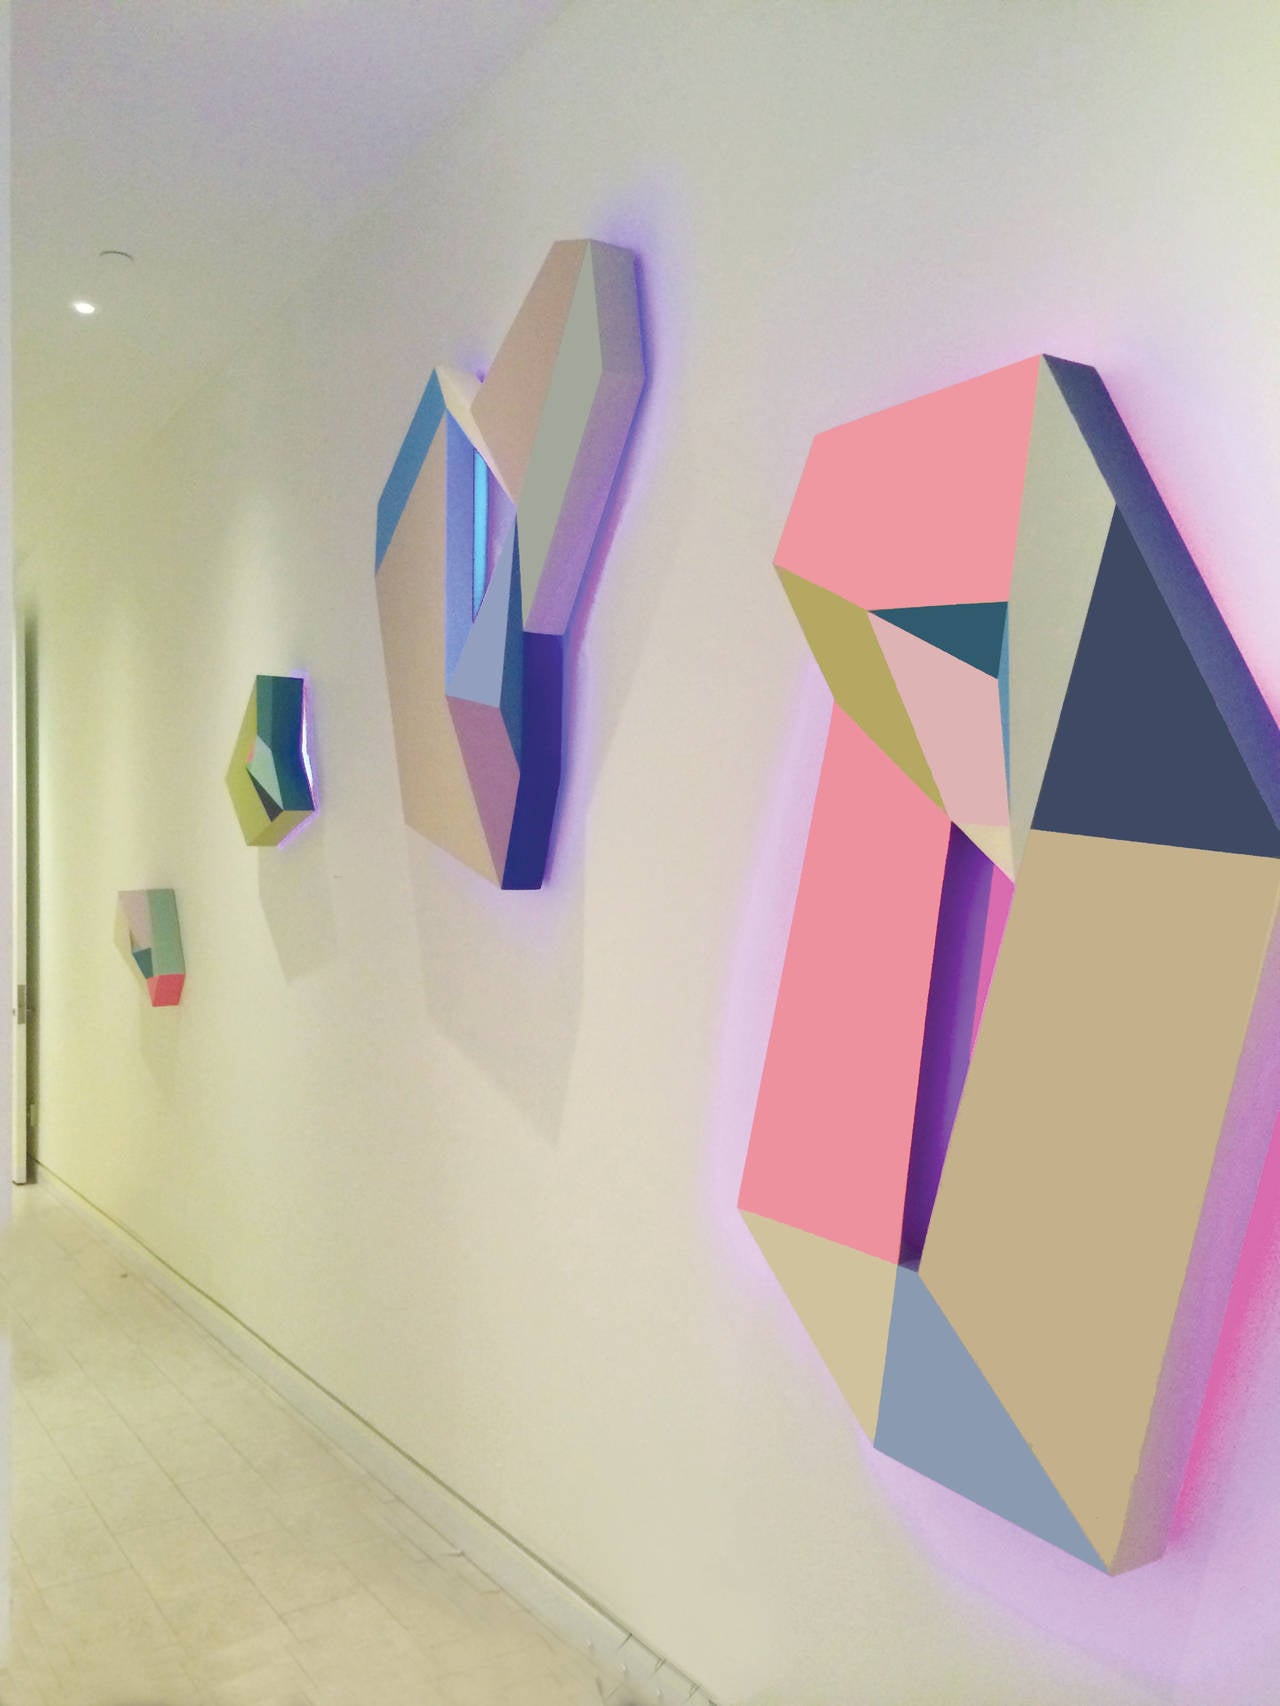 inter-Light#1 - Bright neon LED light sculptural painting on linen and wood - Sculpture by Zin Helena Song